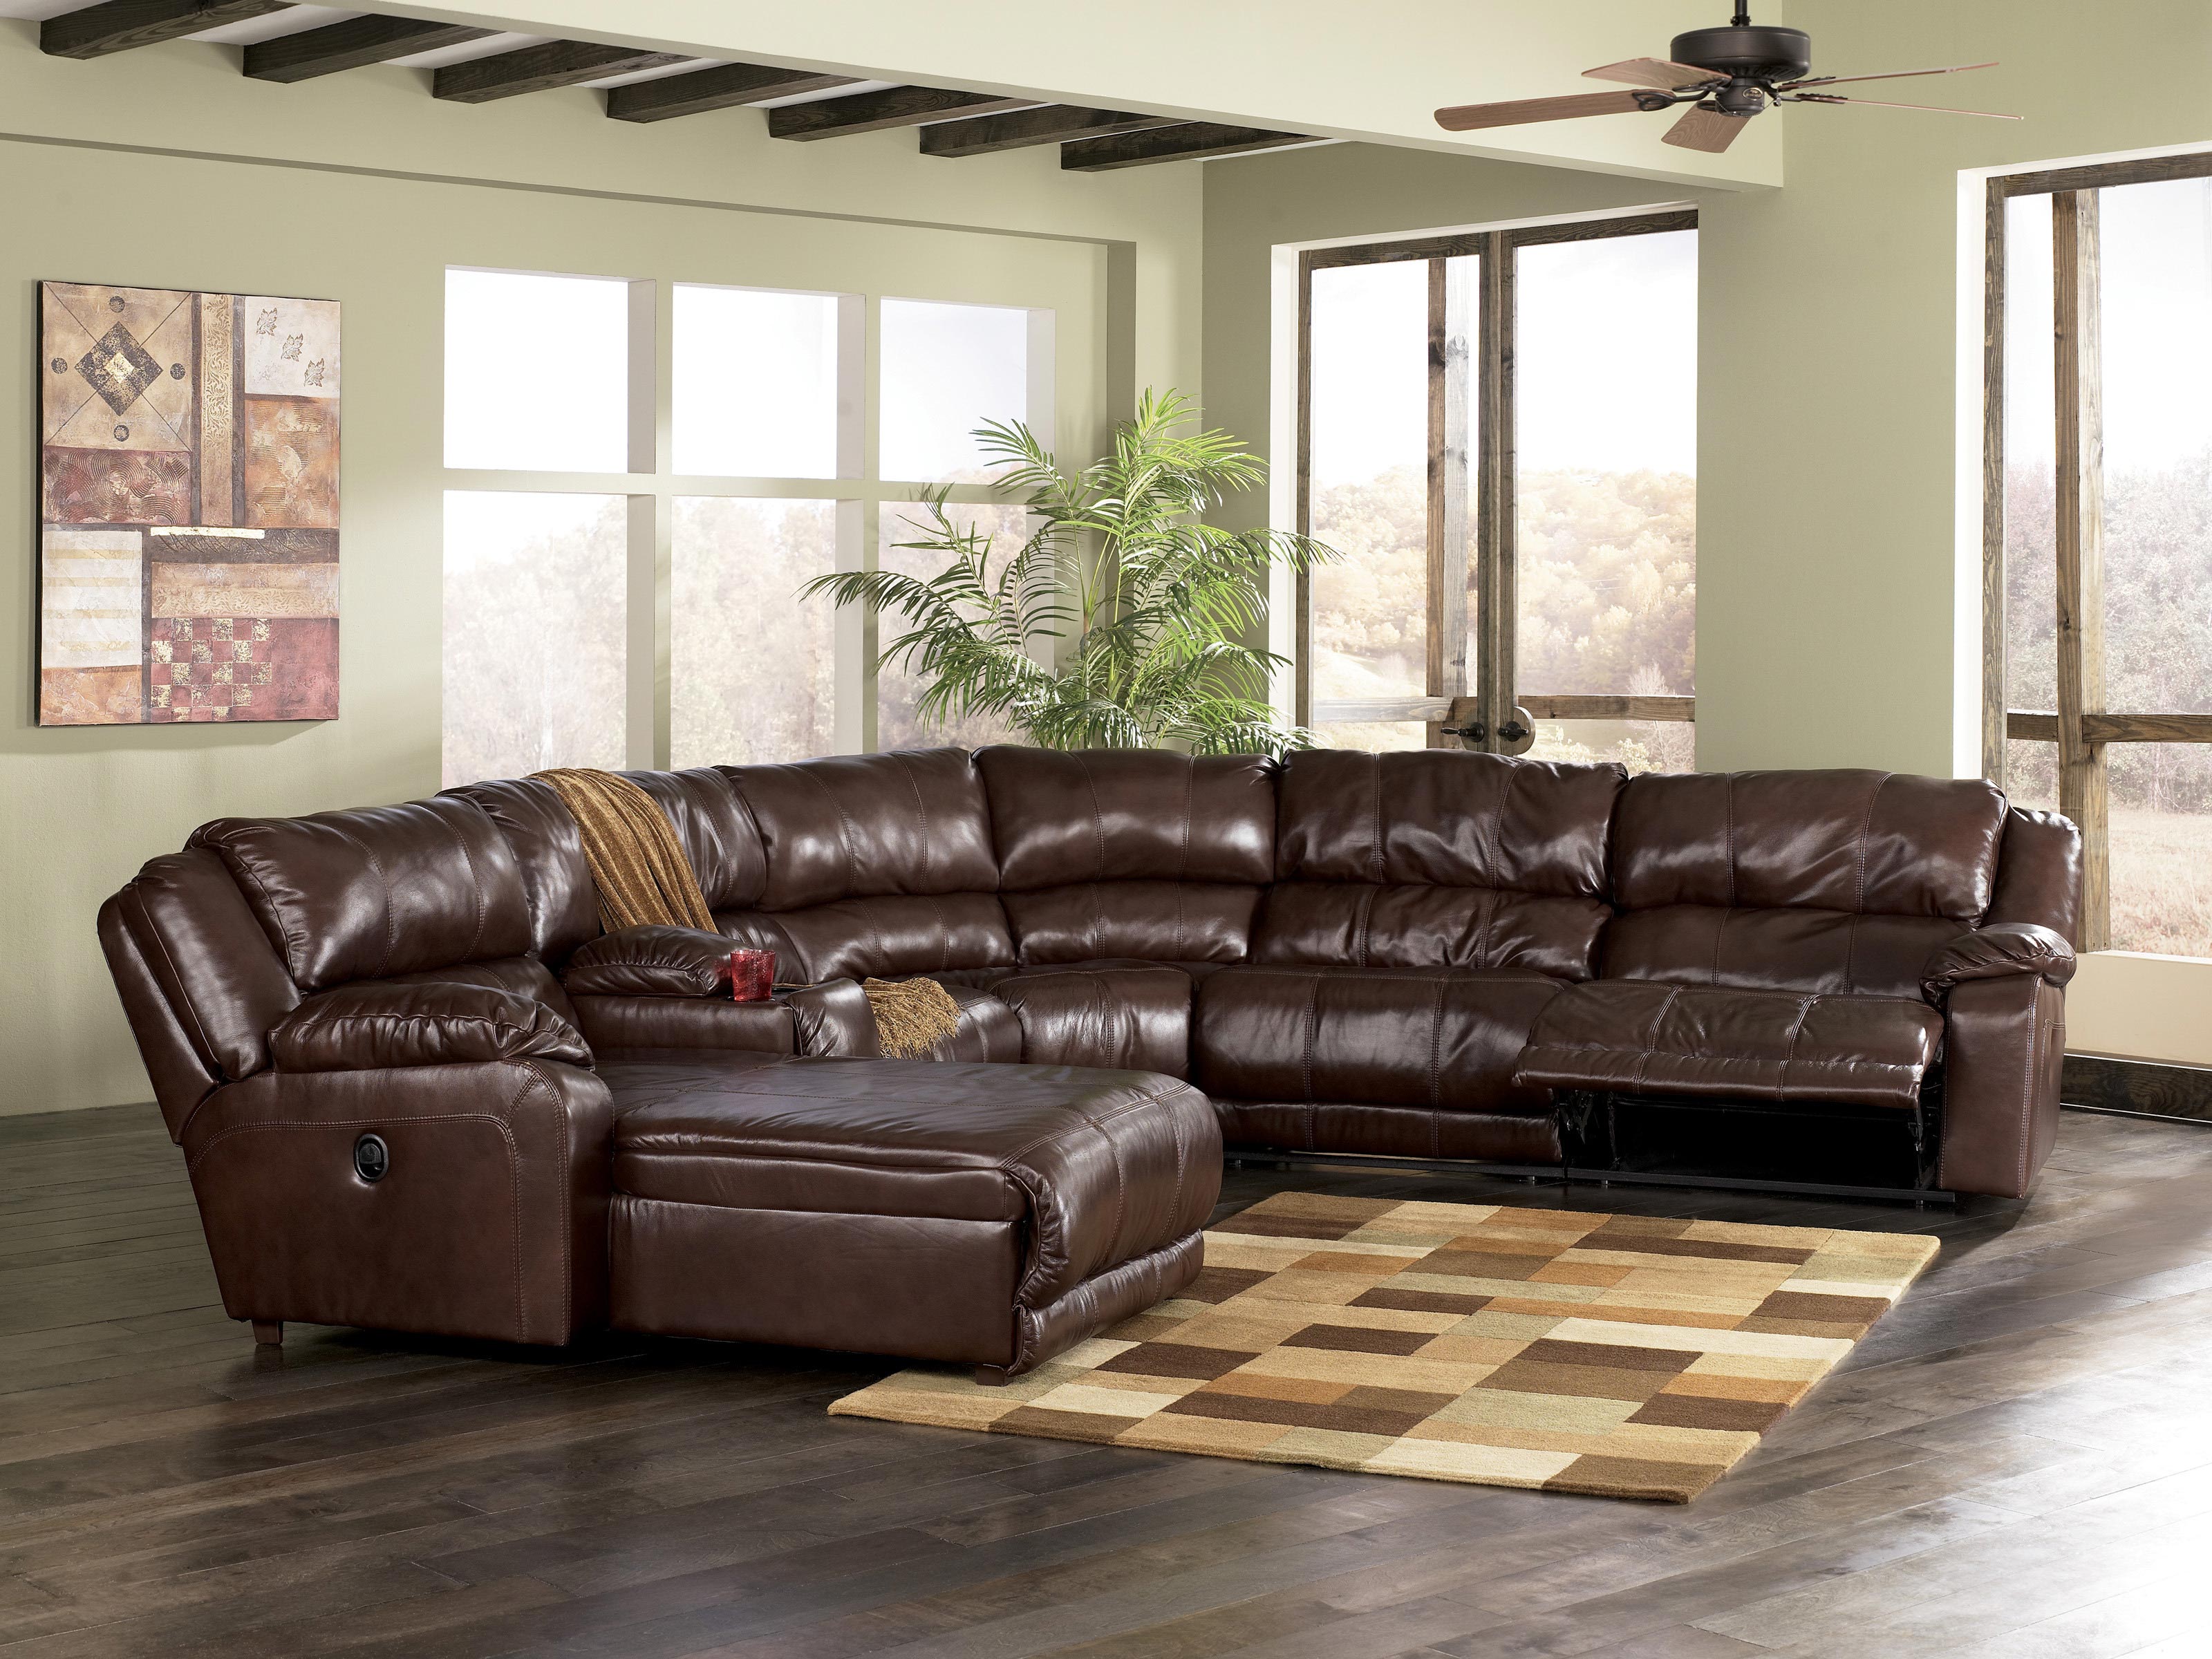 leather sectional sofa decorating ideas